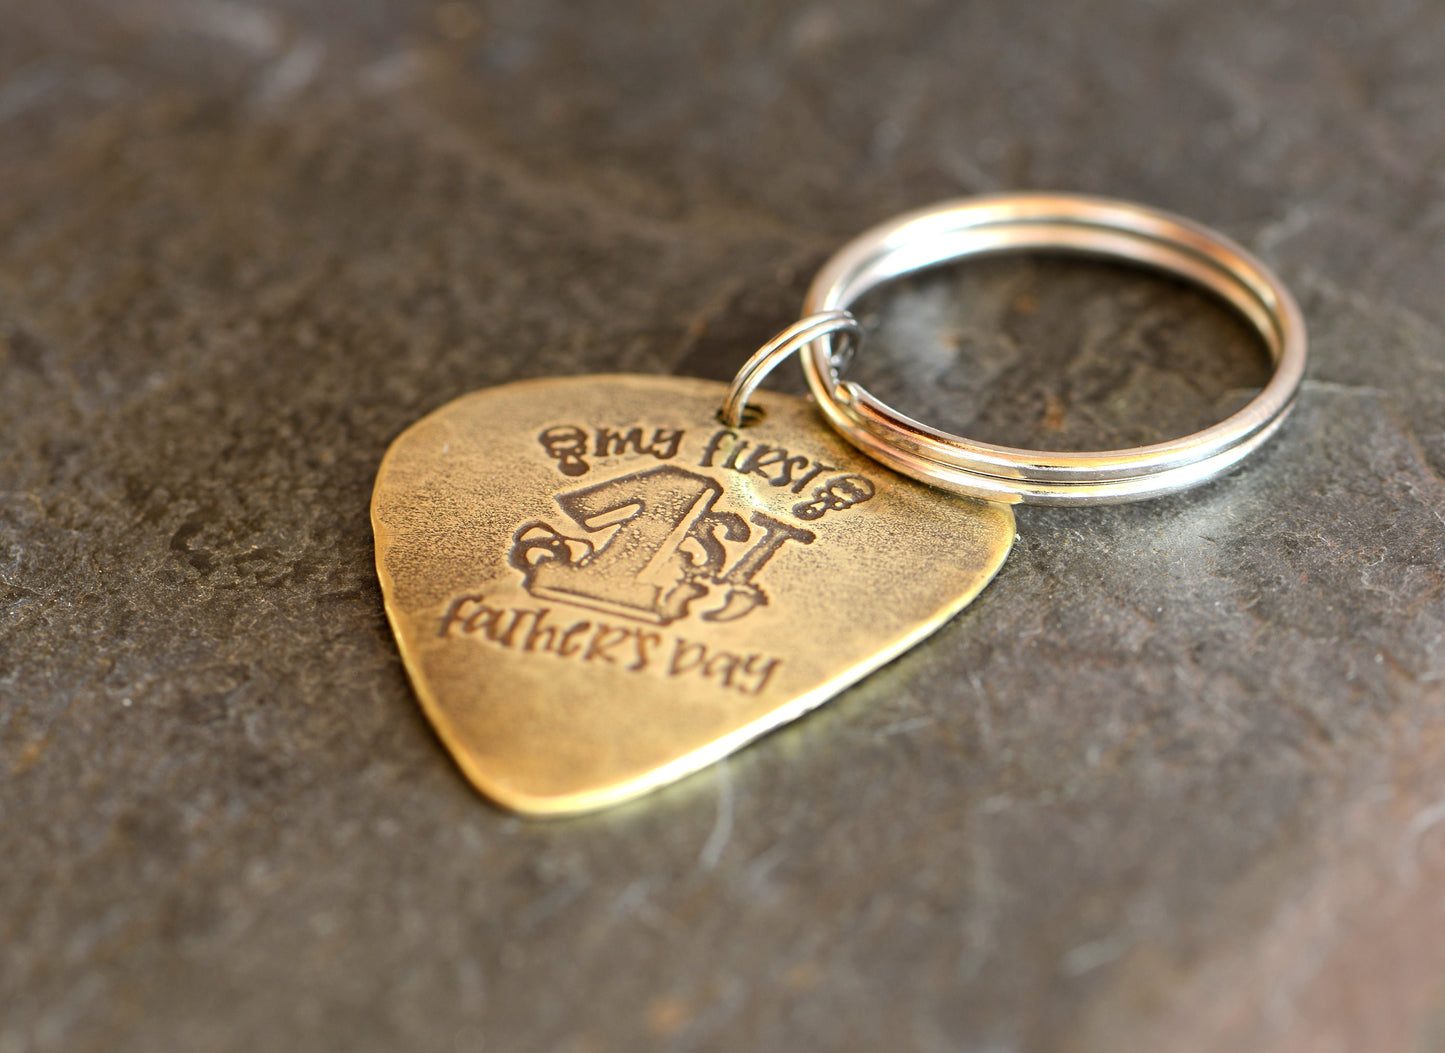 Guitar pick key chain to celebrate dads first fathers day in bronze or your choice of metals